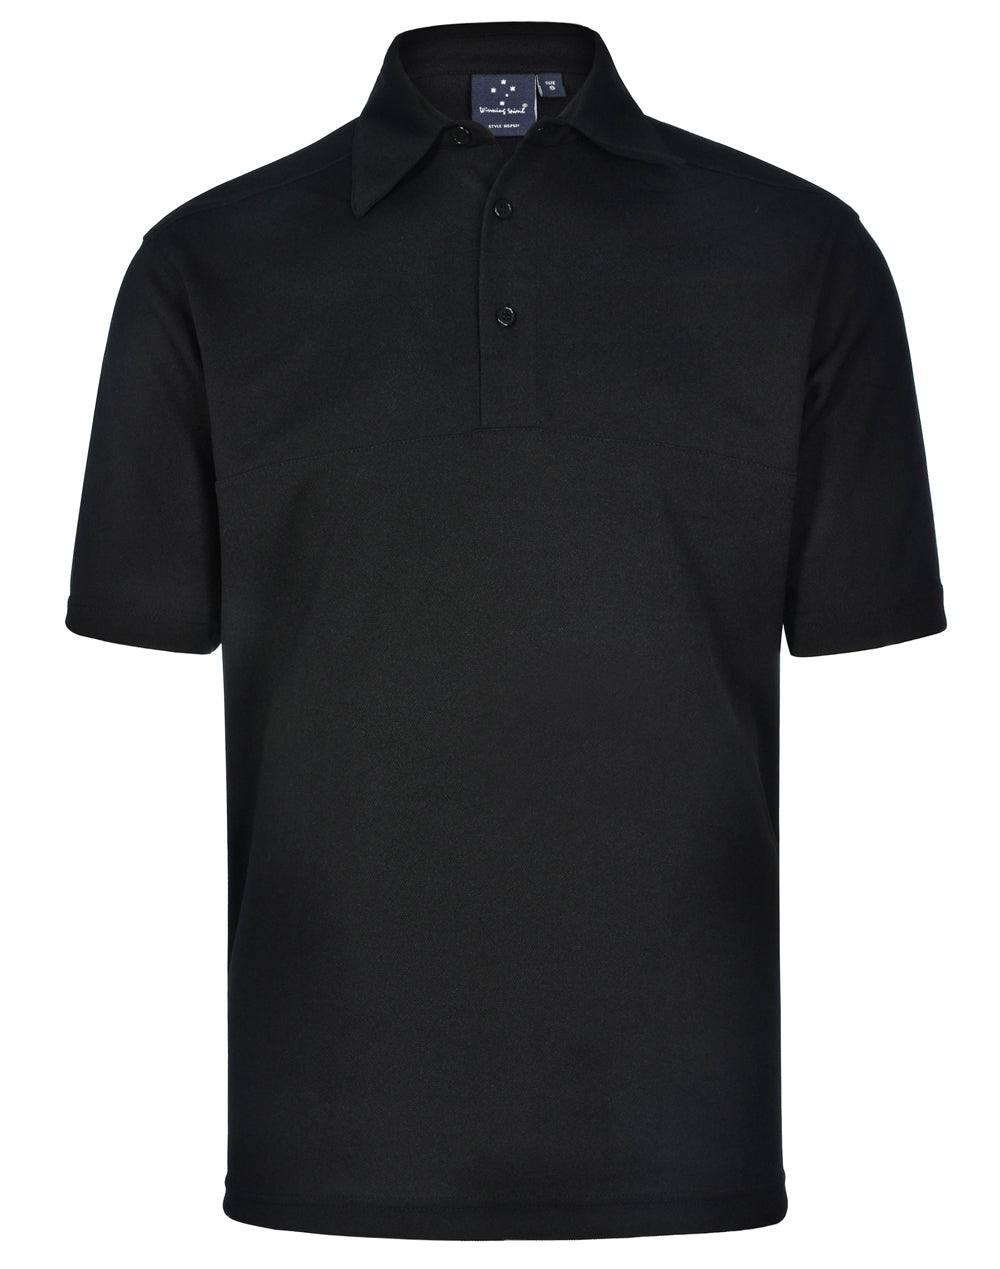 [PS21] Men's CoolDry short sleeve polo